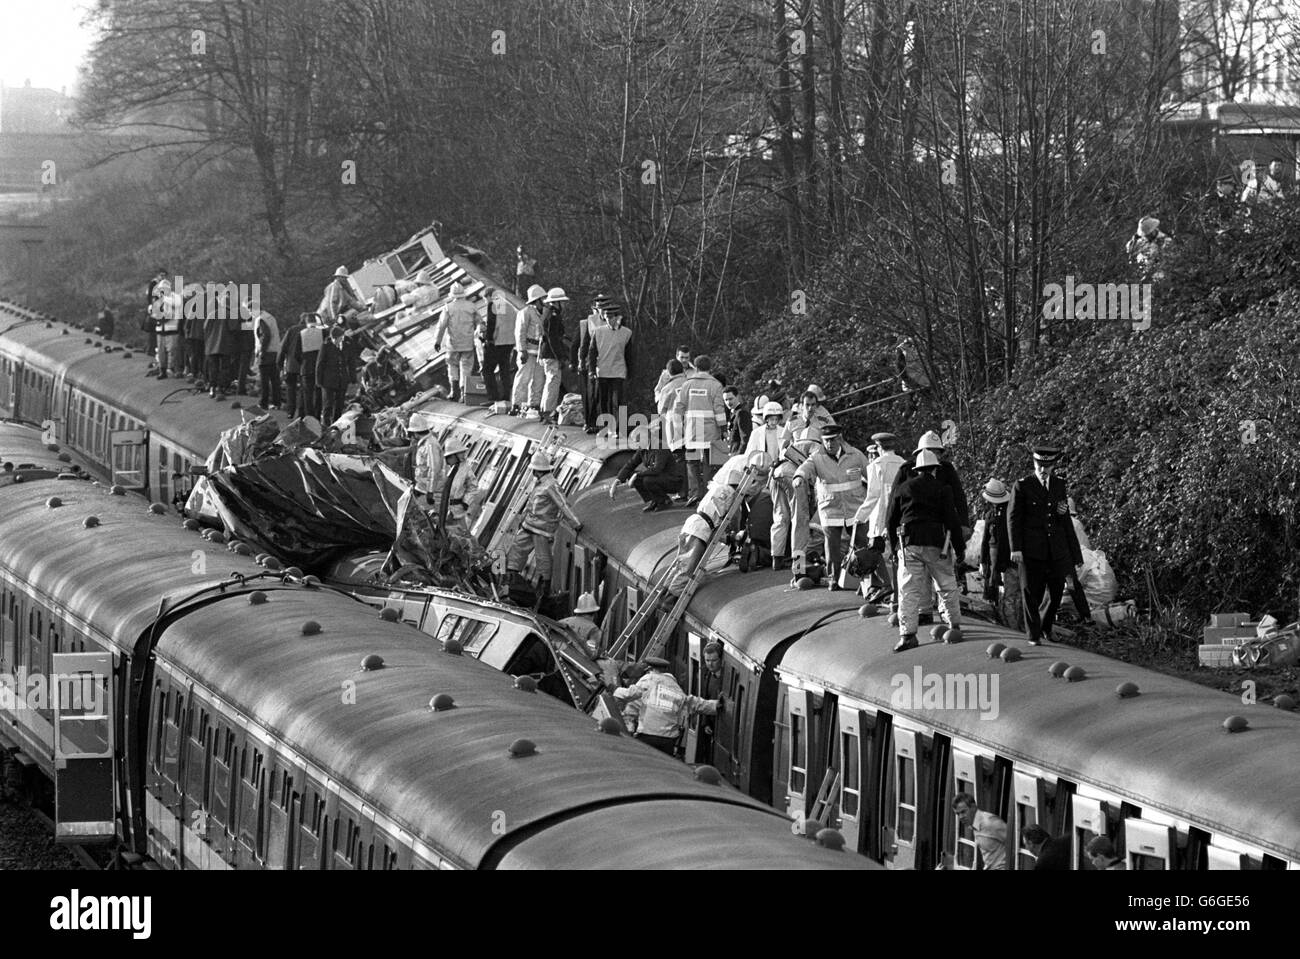 Rescue workers clamber over the wreckage of three trains that crashed near Clapham Junction, London, to help injured passengers following a multiple train crash in which 35 people were killed and 500 were injured when a crowded passenger train crashed into the rear of another train that had stopped at a signal, and an empty train, travelling in the other direction, crashed into the debris. Stock Photo